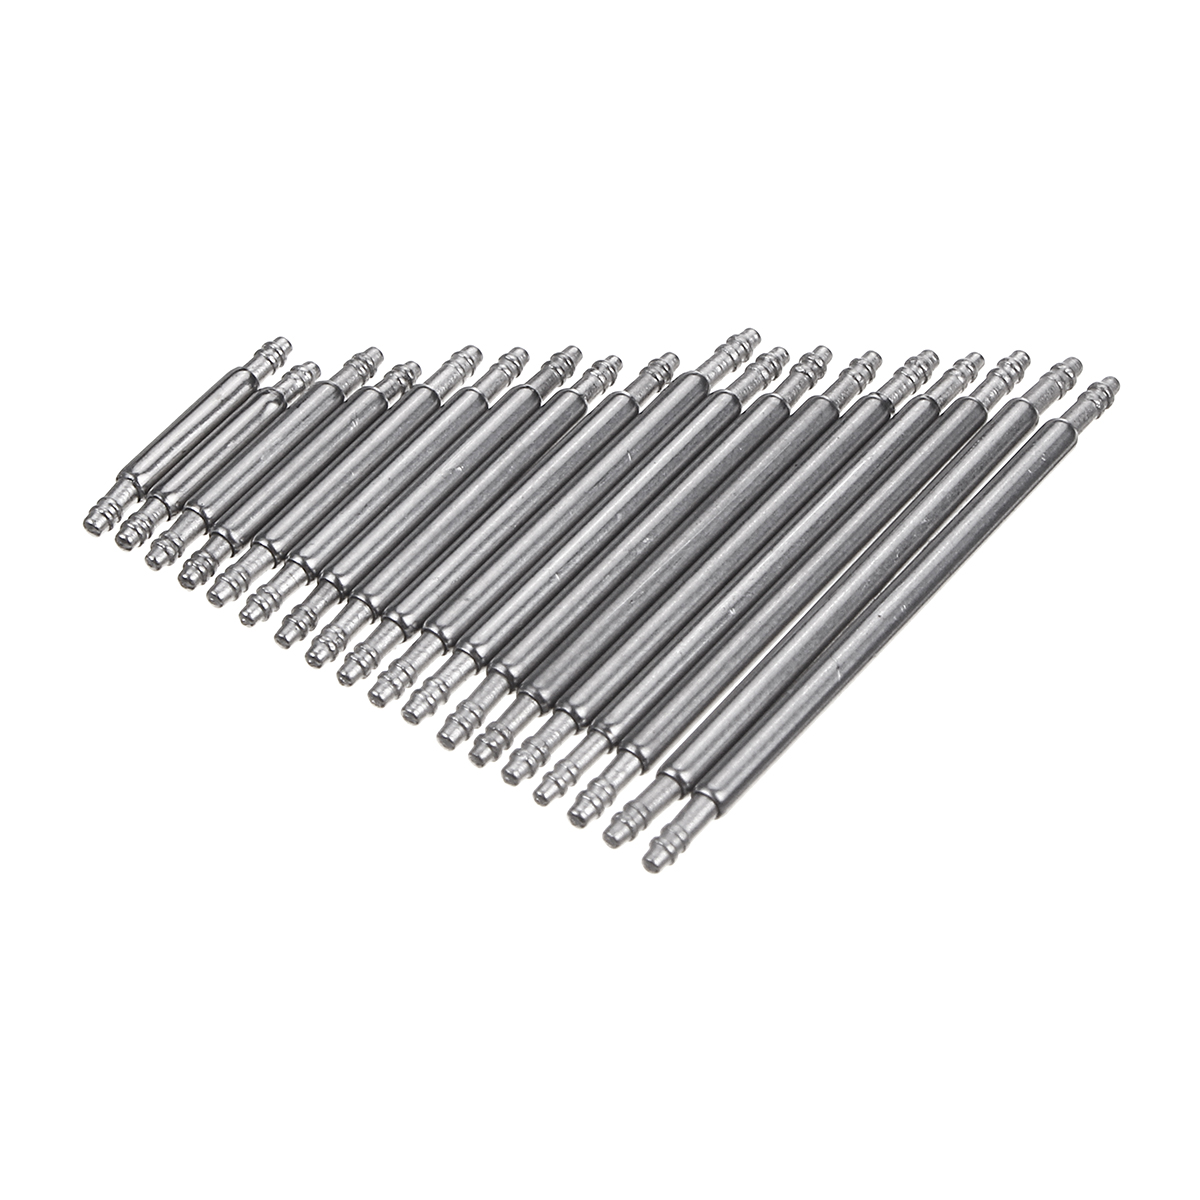 360Pcs-Stainless-Steel-8-25mm-Watch-Band-Strap-Spring-Bars-Link-Pins-Watch-Repair-Set-1558230-6